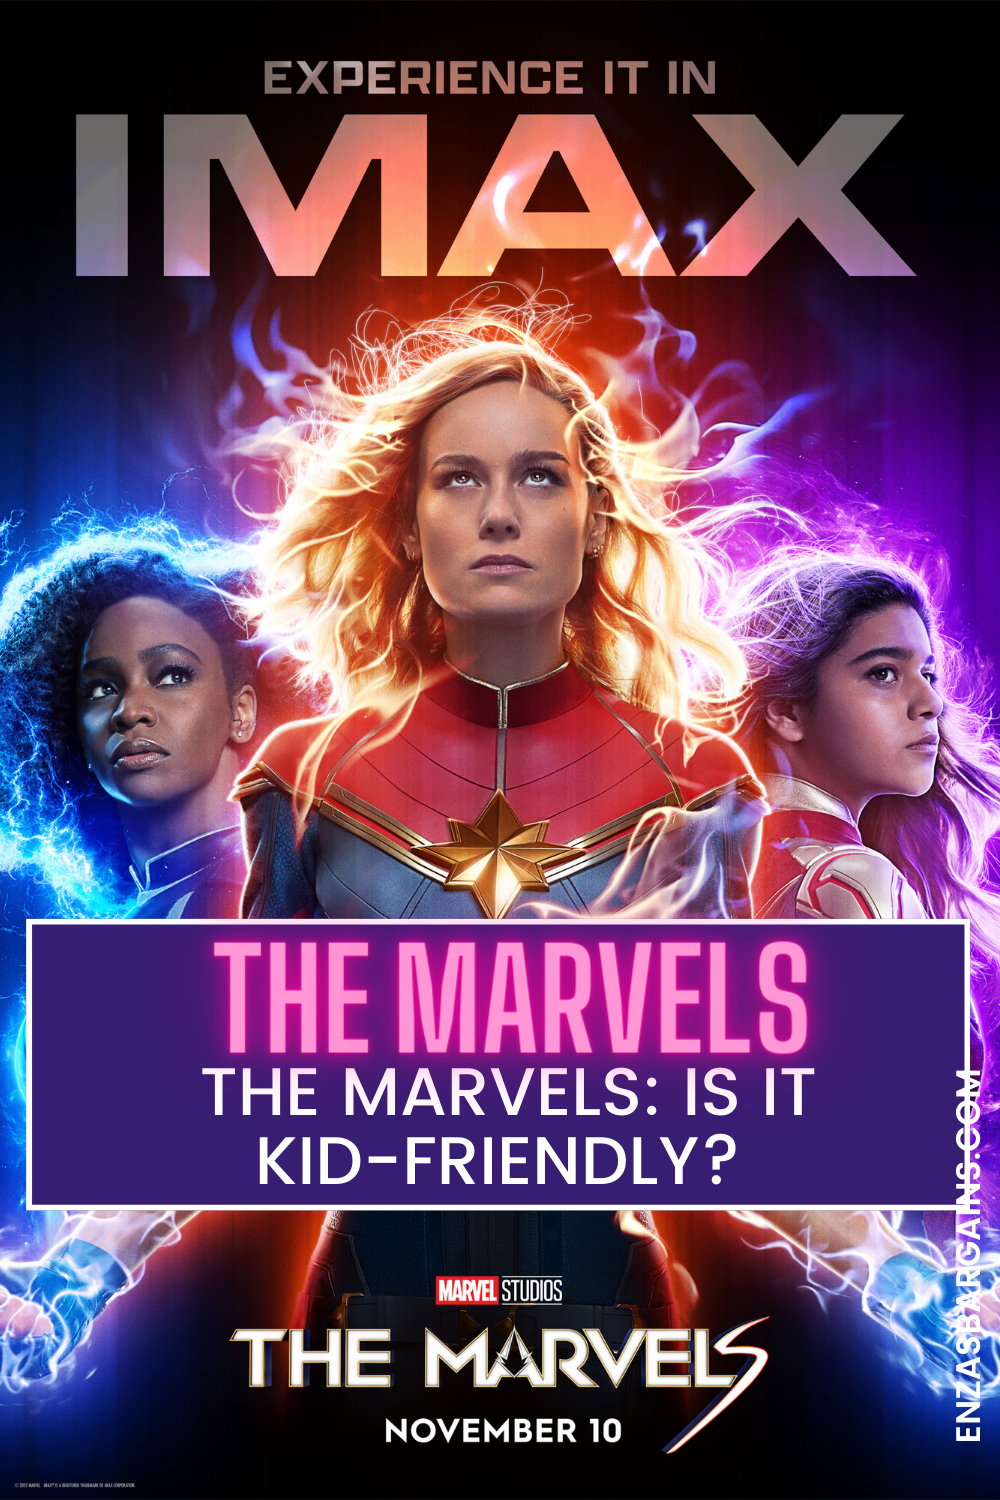 THE MARVELS - Movieguide  Movie Reviews for Families